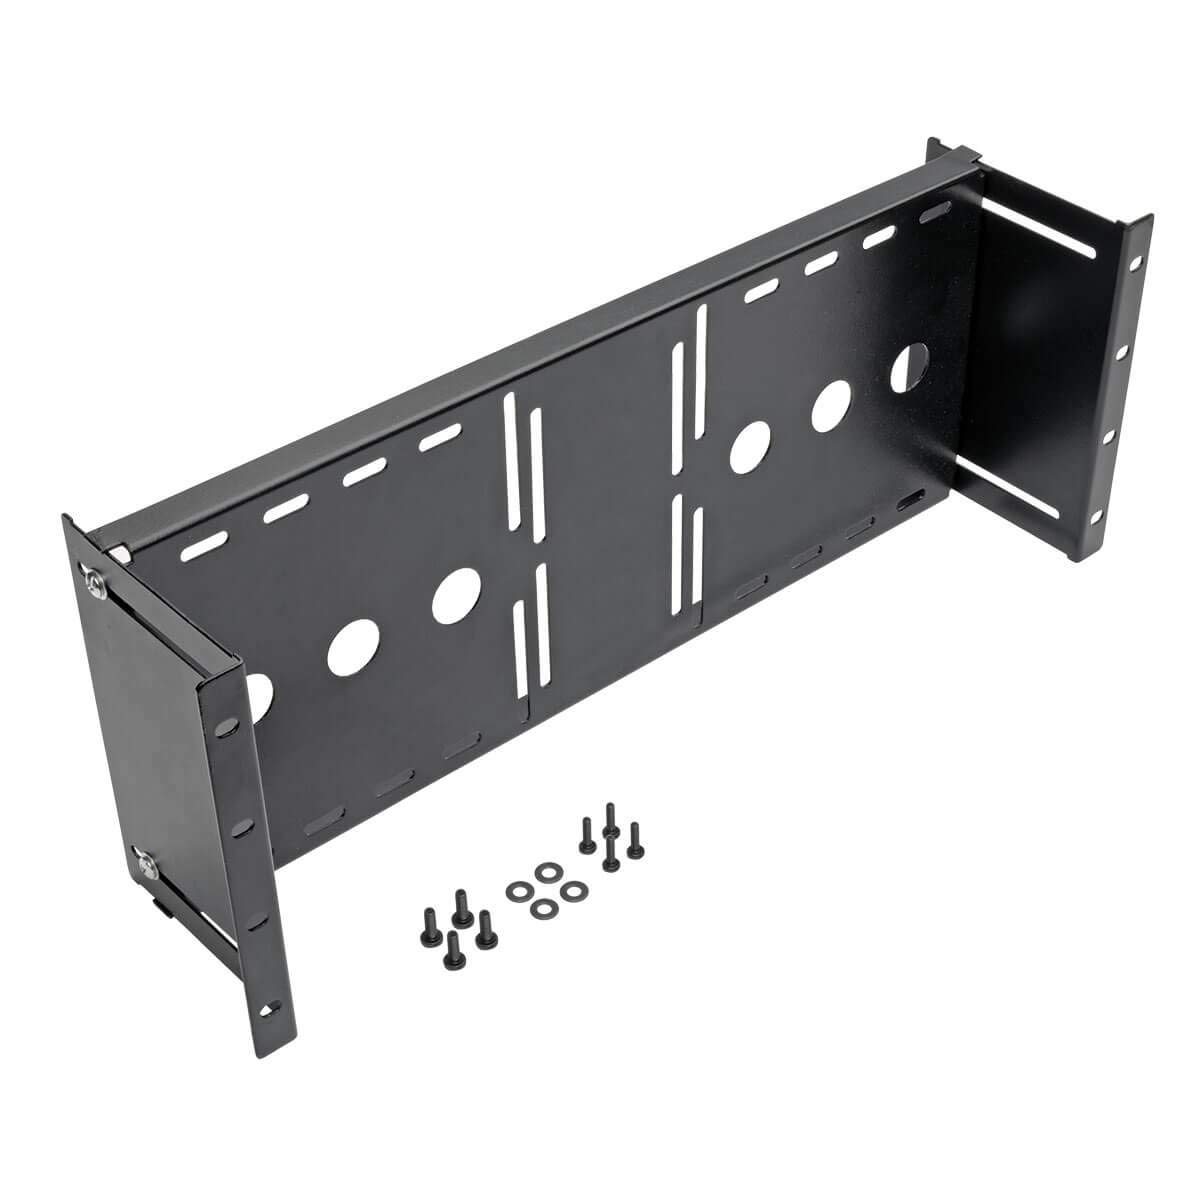 Tripp Lite Monitor Rackmount Bracket 4U for LCD Monitors up to 17-19 in